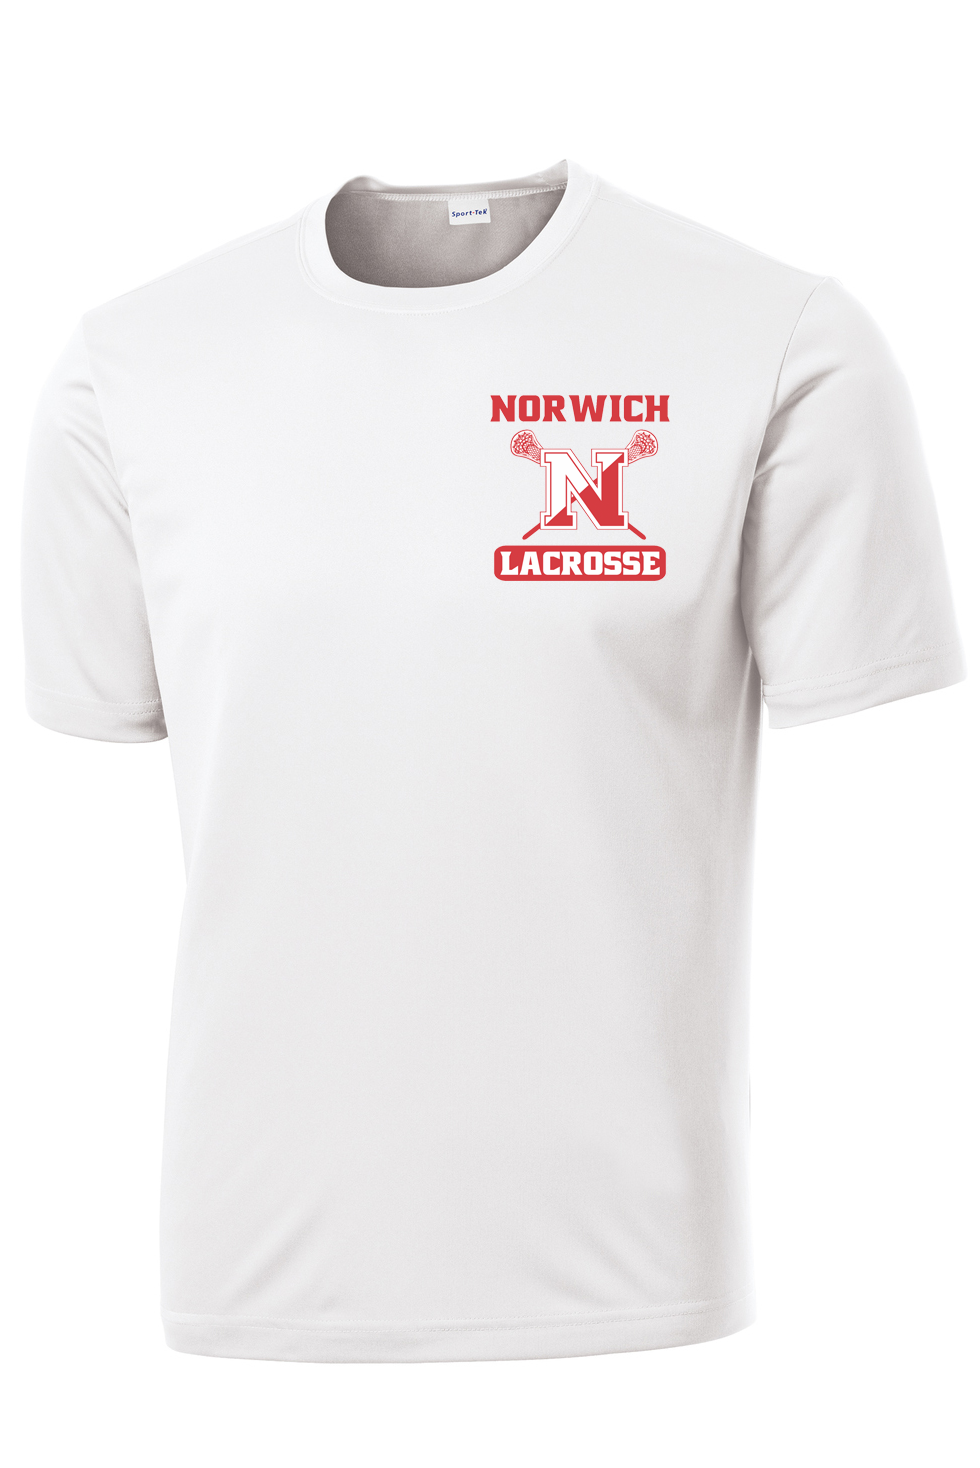 Norwich Youth Lacrosse White Performance T-Shirt